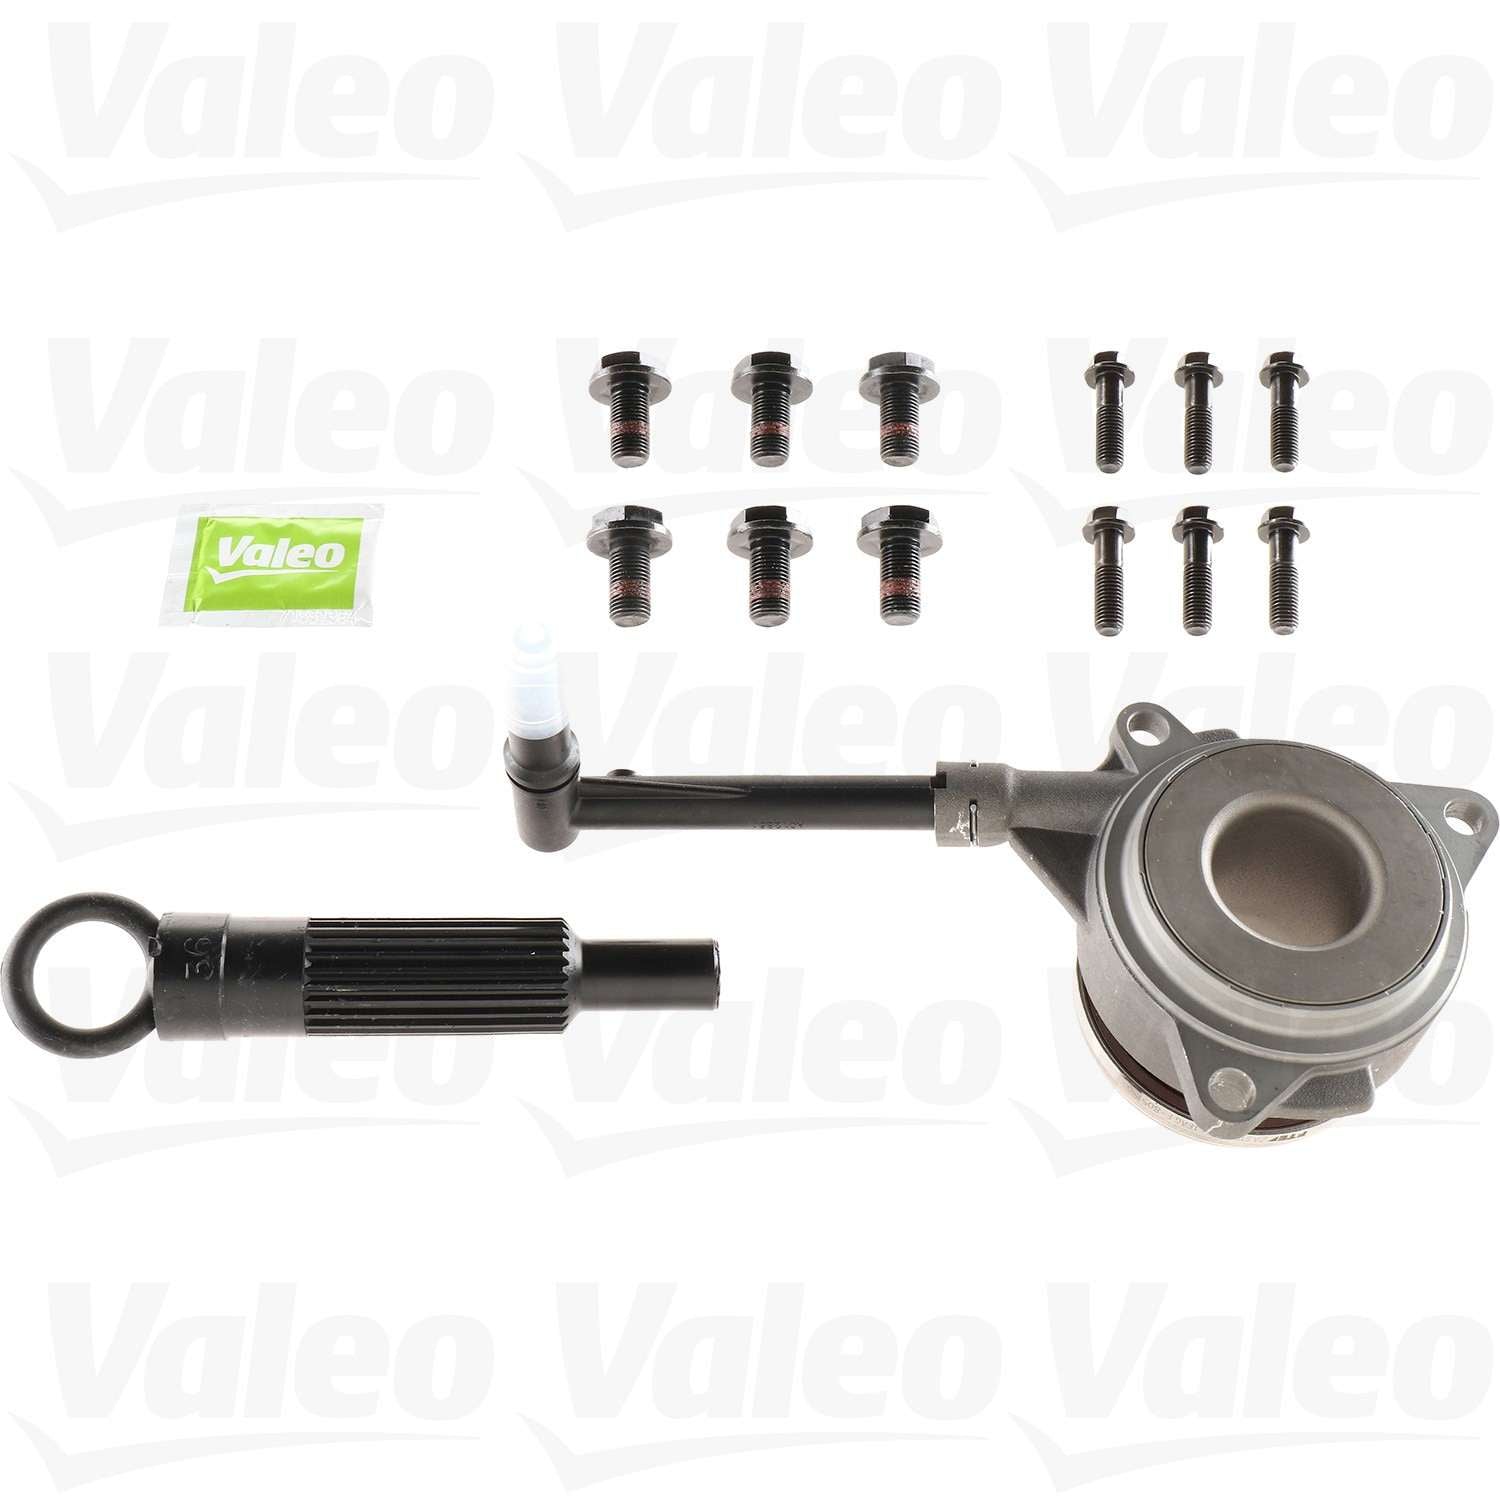 Other View of Clutch Flywheel Conversion Kit VALEO 52405615